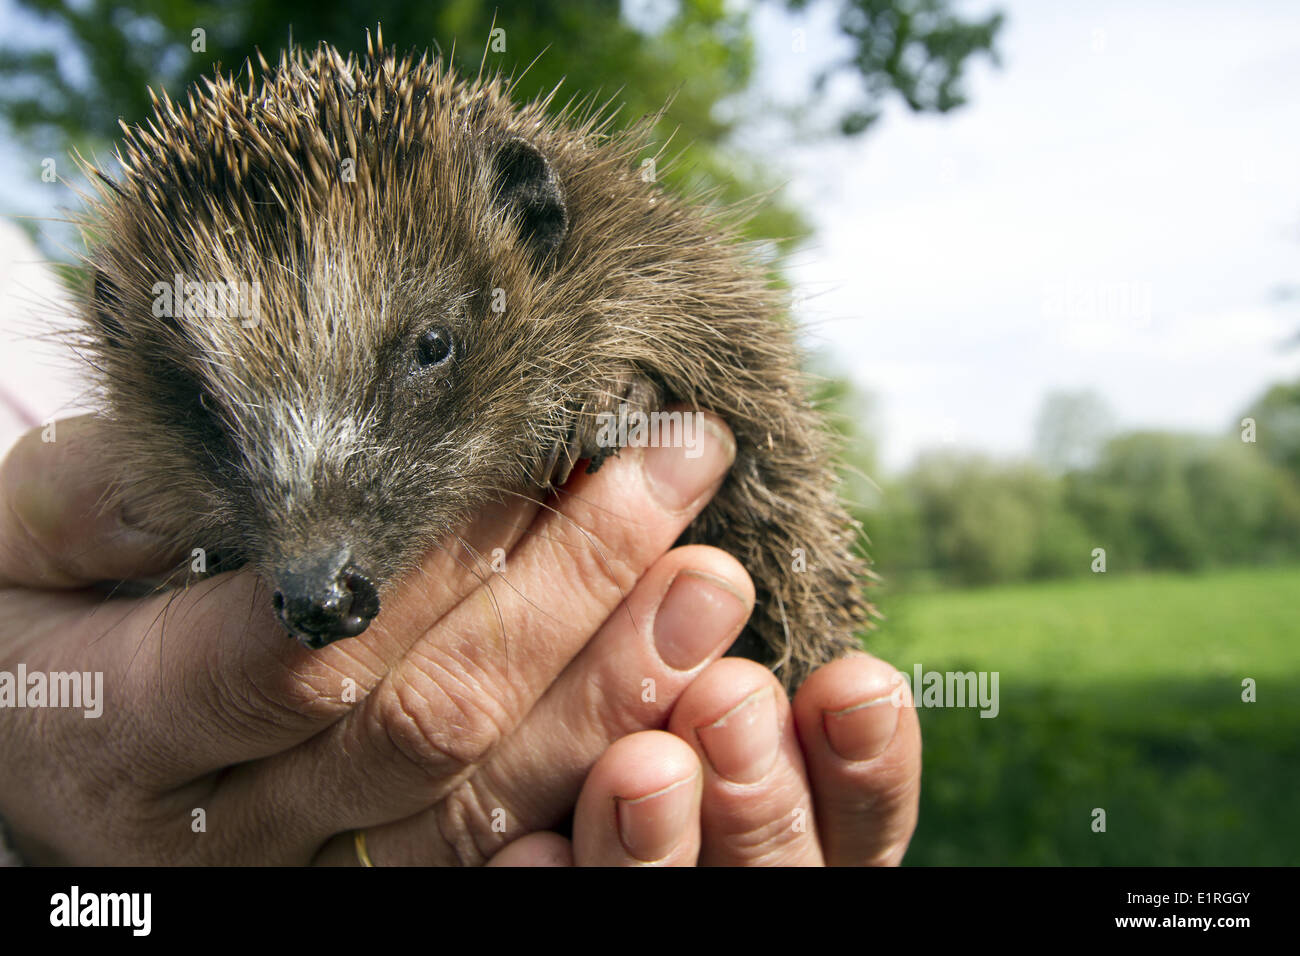 Hedgehog sanctuary placing him back in nature Stock Photo